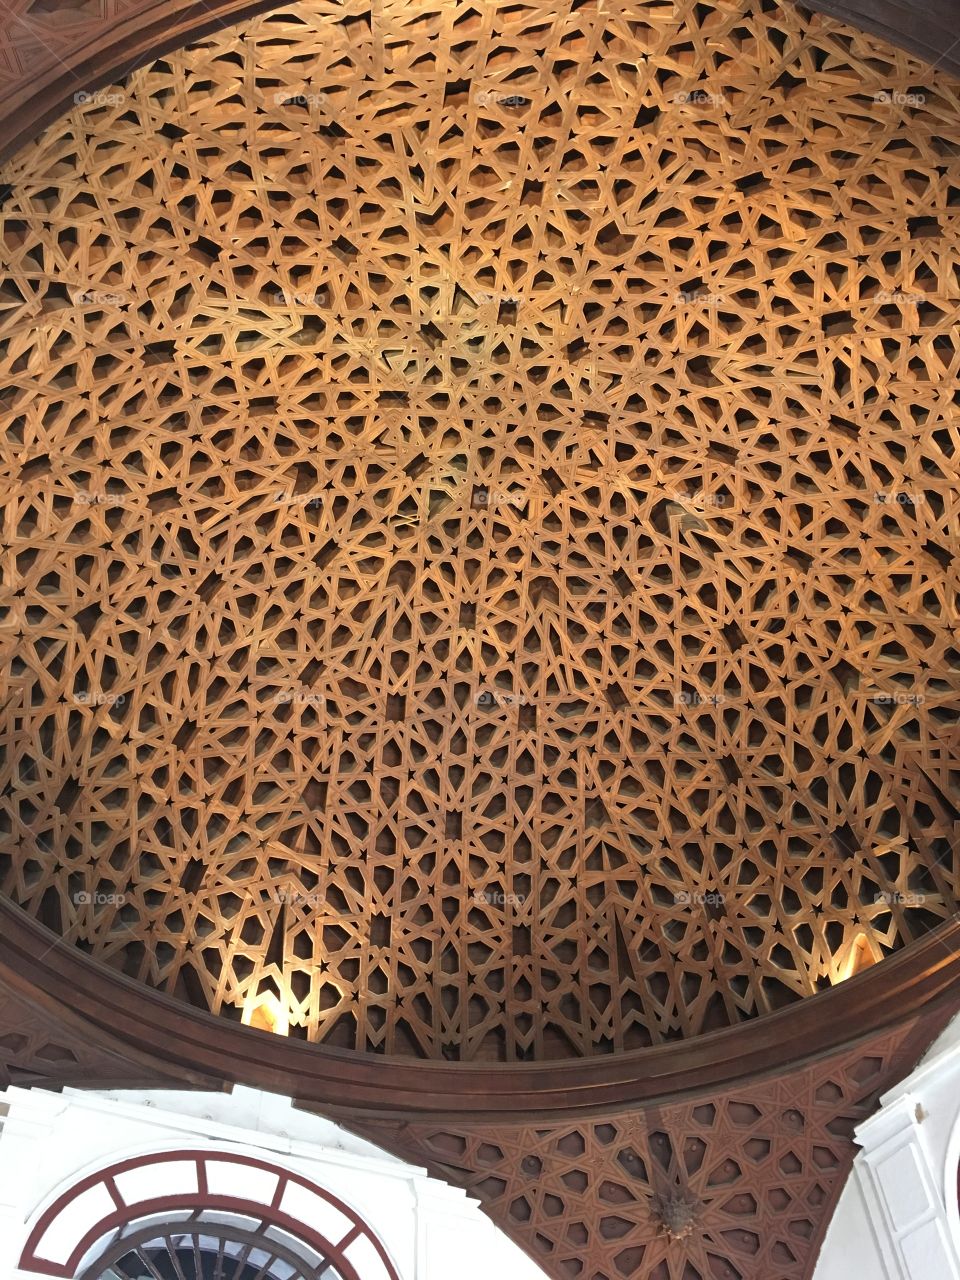 Arab-inspired dome ceiling